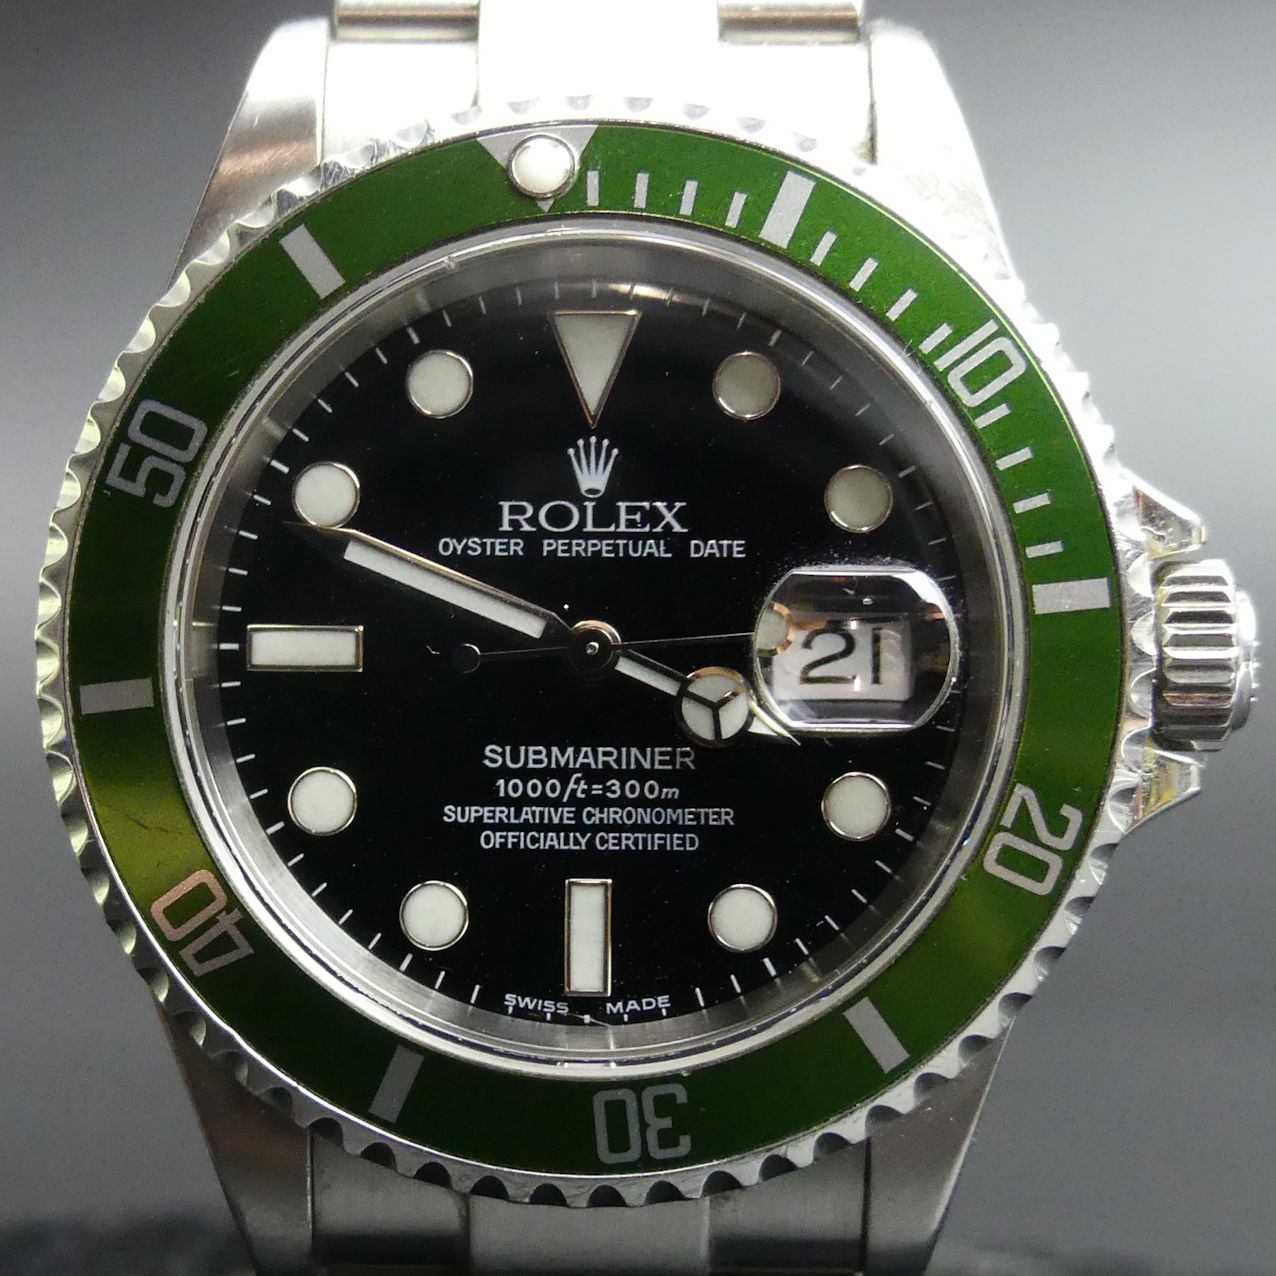 Rolex Submariner with a green bezel, dating from 2004 and with the 'Flat 4'. It has an F serial